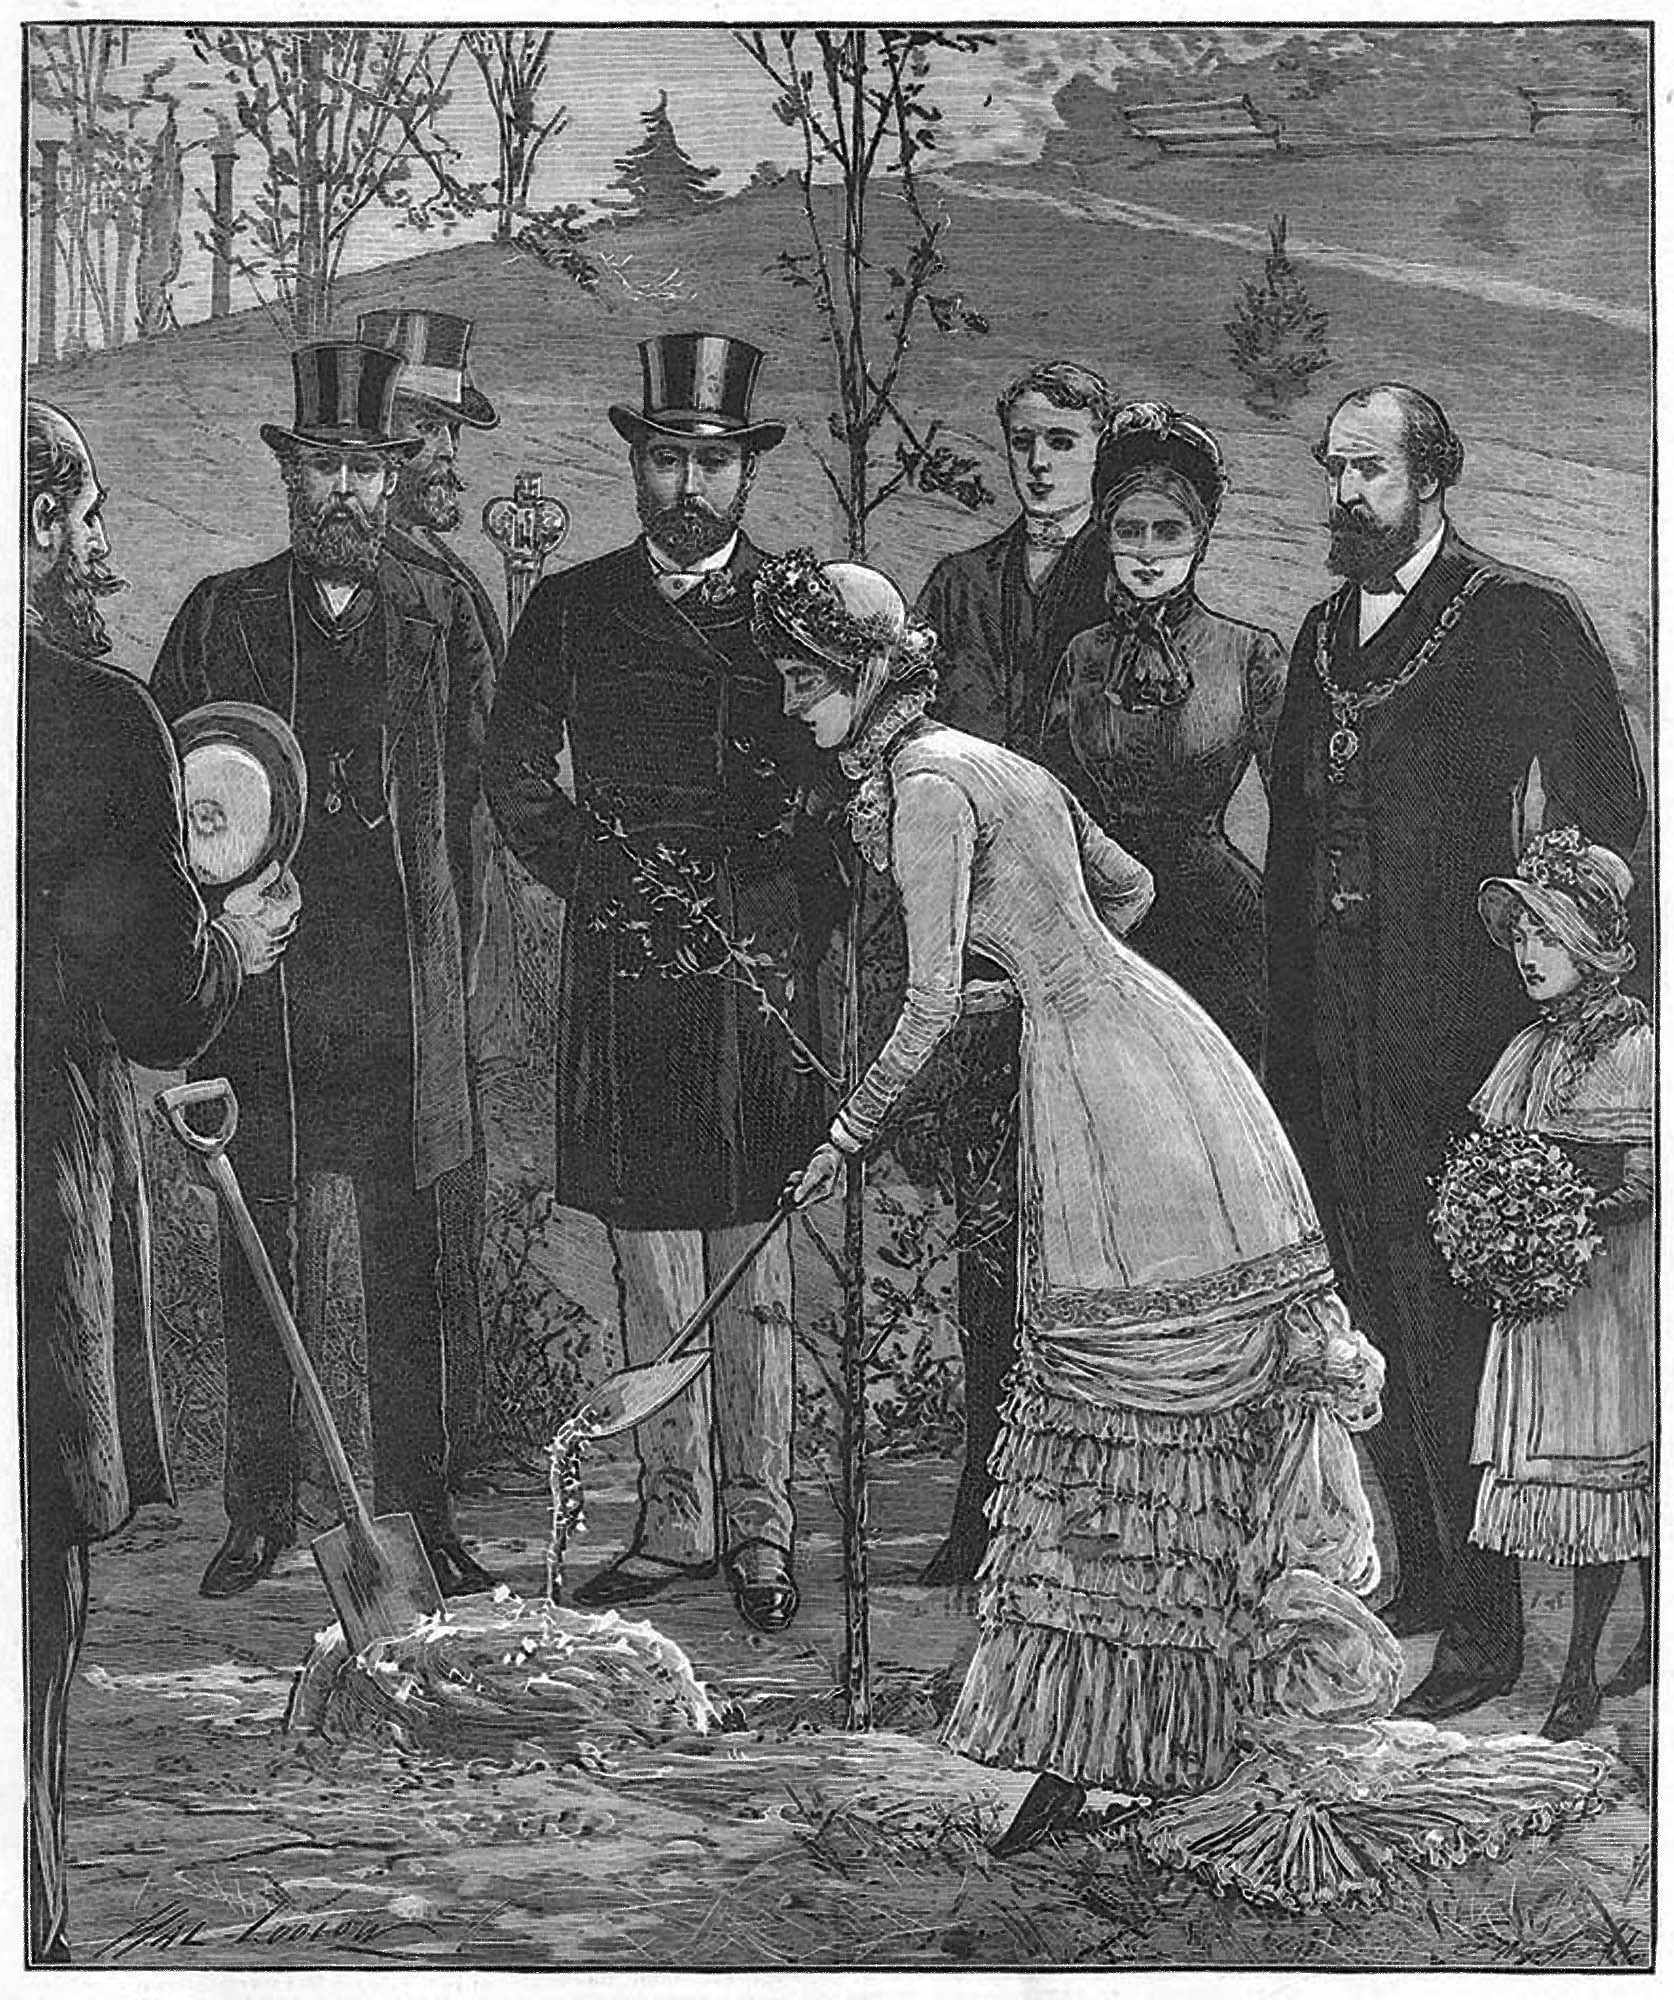 An engraving depicting the planting an oak tree in Abbey Park during the royal visit to Leicester, 1882 - 